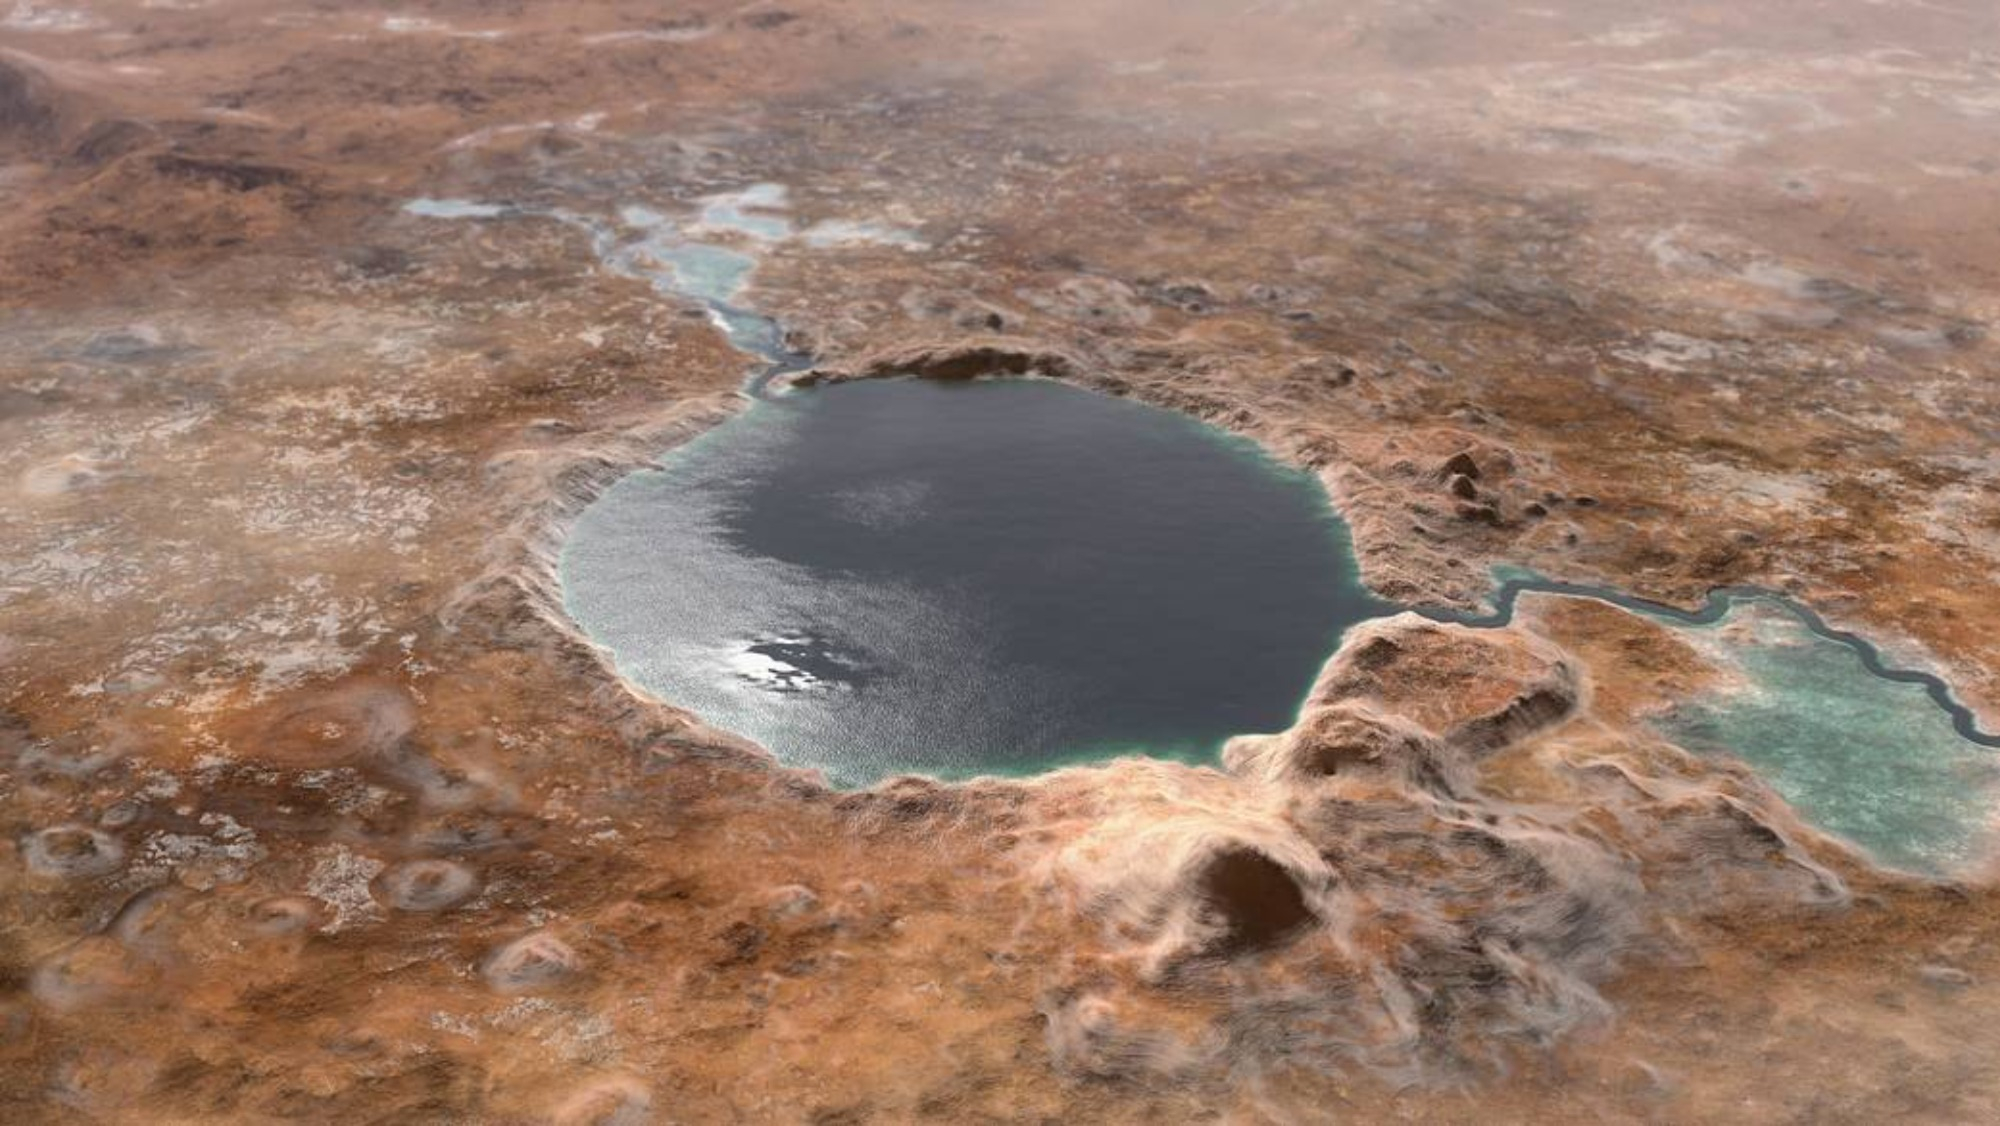 Jezero Crater as it may have looked billions of years go on when it was a Martian lake.
